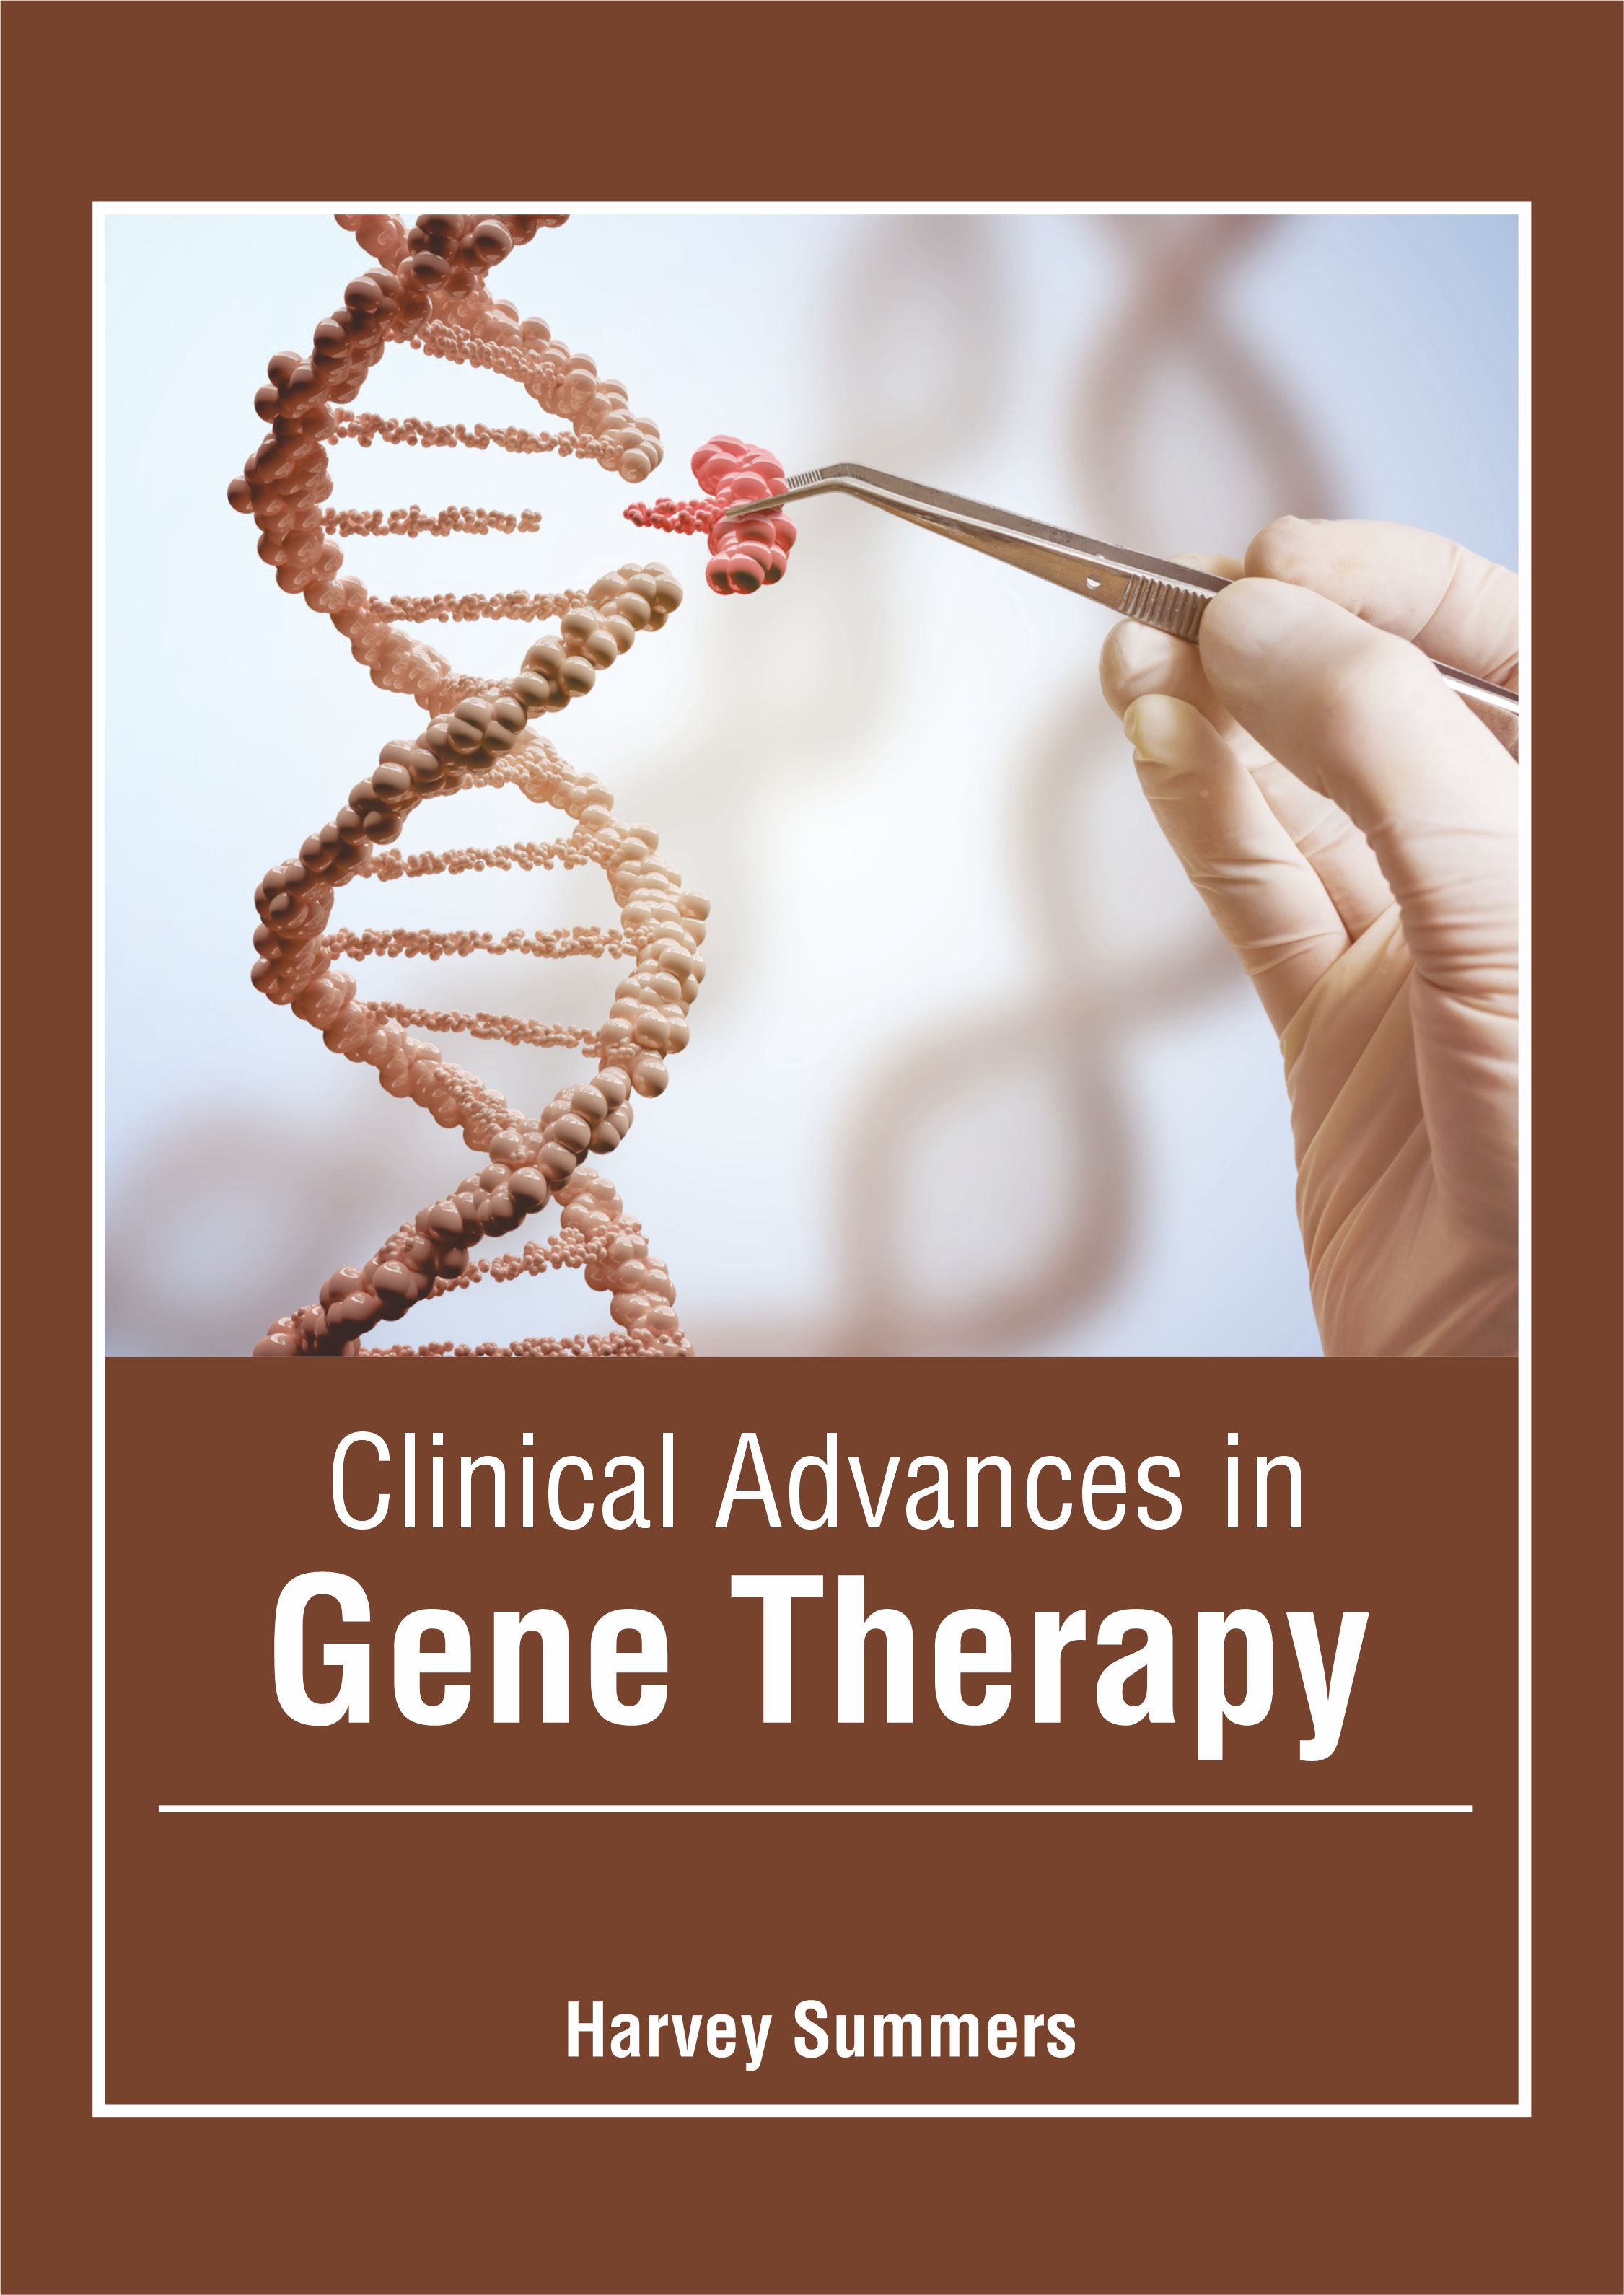 CLINICAL ADVANCES IN GENE THERAPY